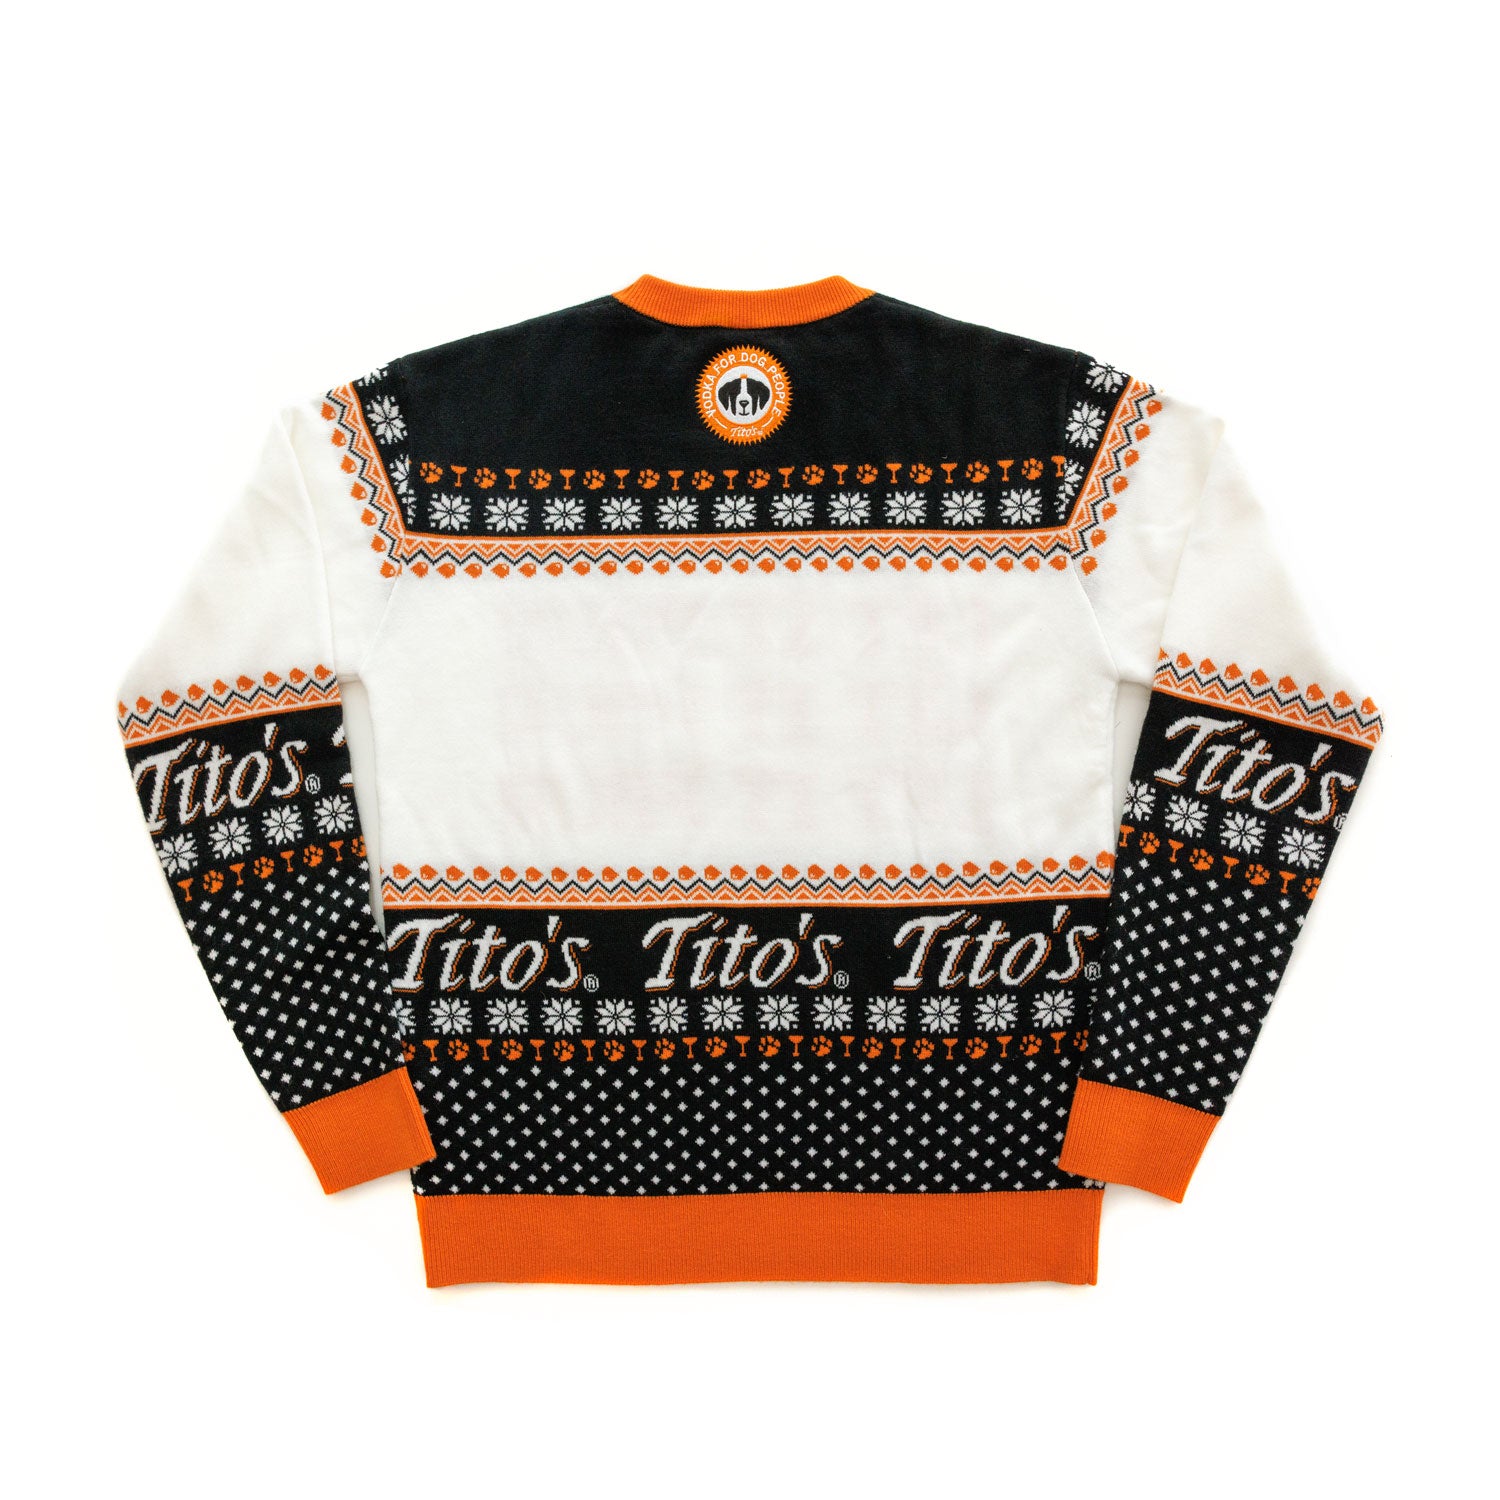 Back view of black, orange, and white pullover with snowflake designs, martinis, paw prints, Tito's wordmark, and Vodka for Dog People logo